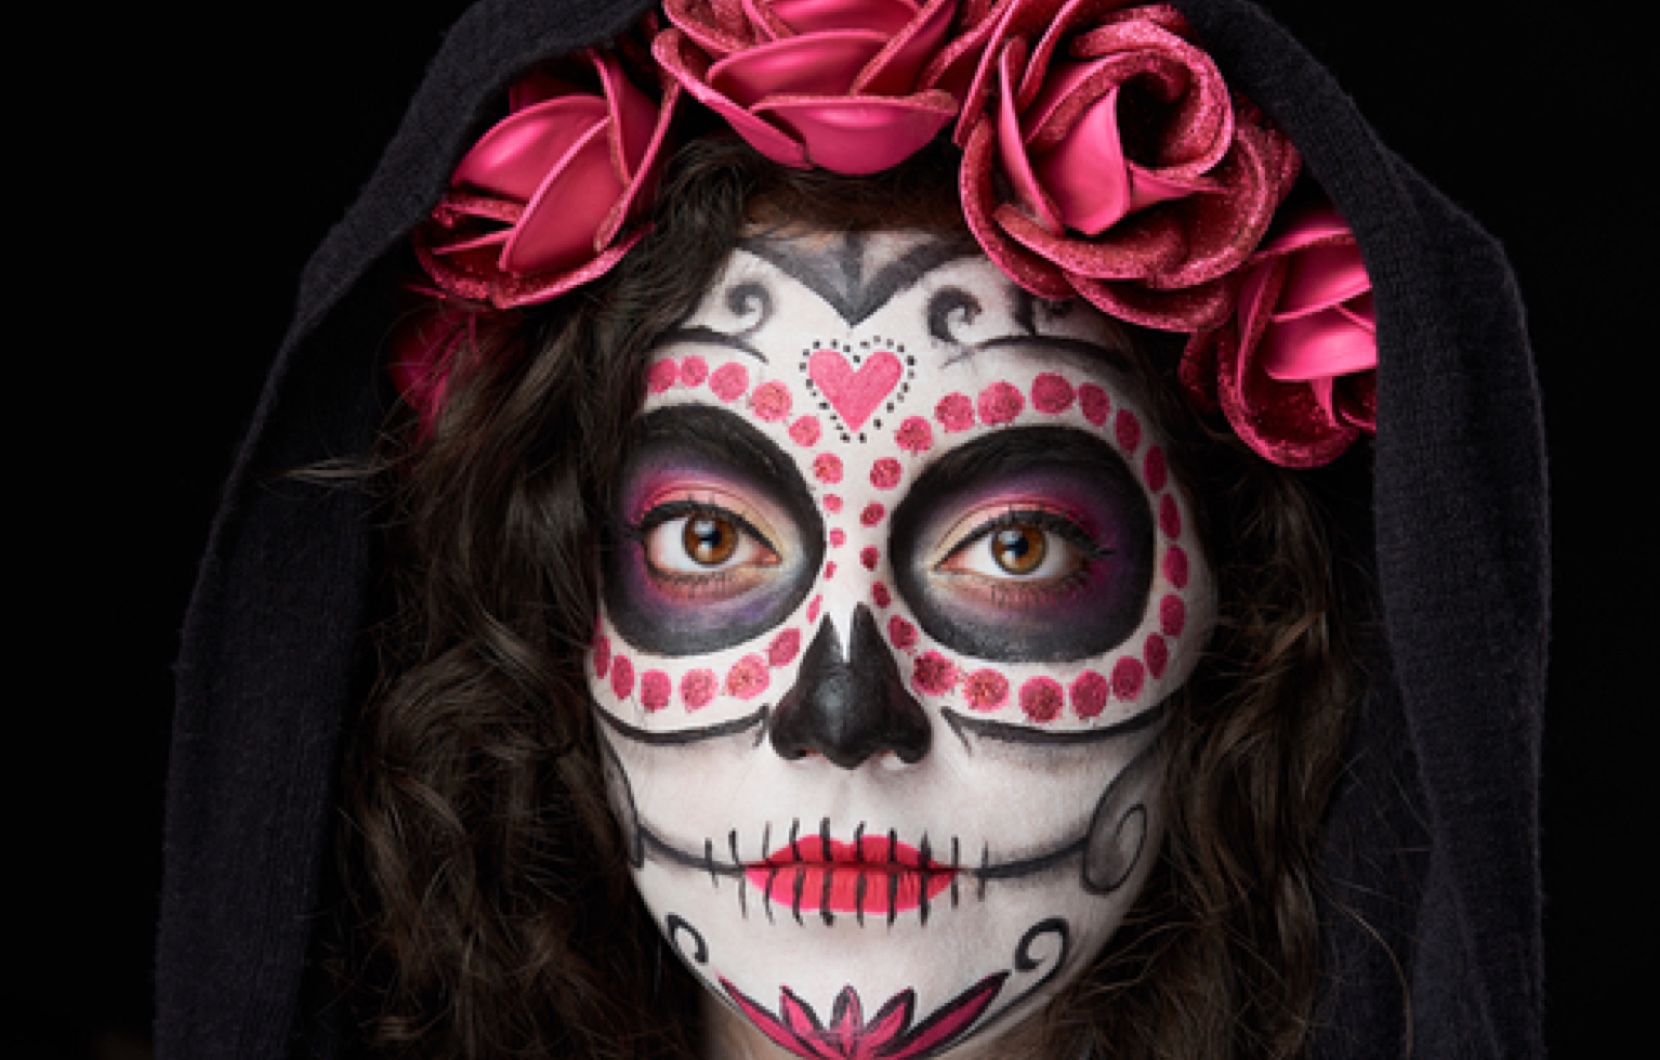 Colorful, vibrant, and haunting—Calavera makeup is an integral part of the holiday.